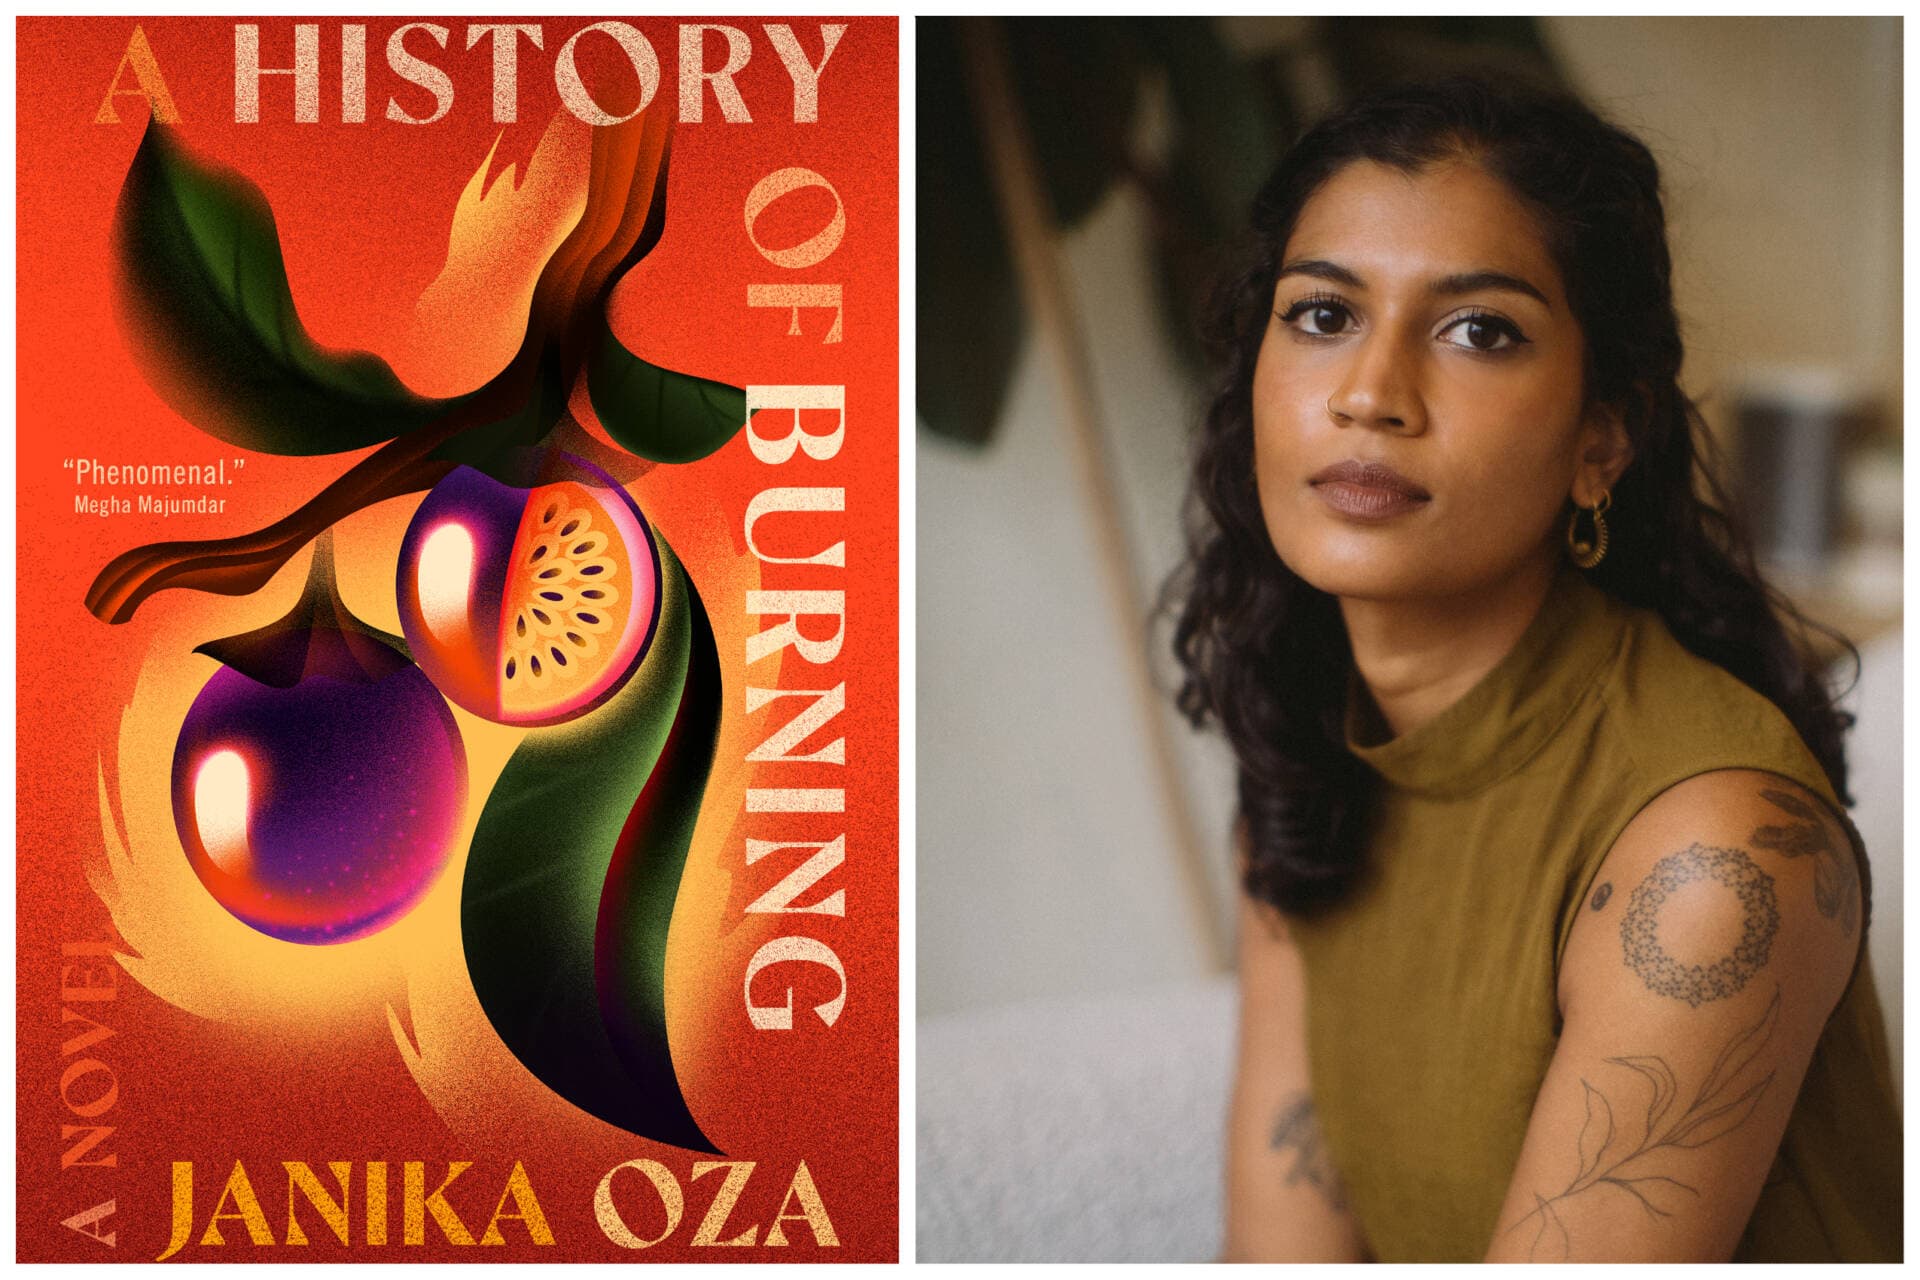 Janika Oza's debut novel &quot;A History of Burning&quot; follows one family over 100 years and across three continents, exploring themes of erasure, colonialism, family and memory. (Book cover courtesy Grand Central Publishing; photo of author courtesy Yi Shi)